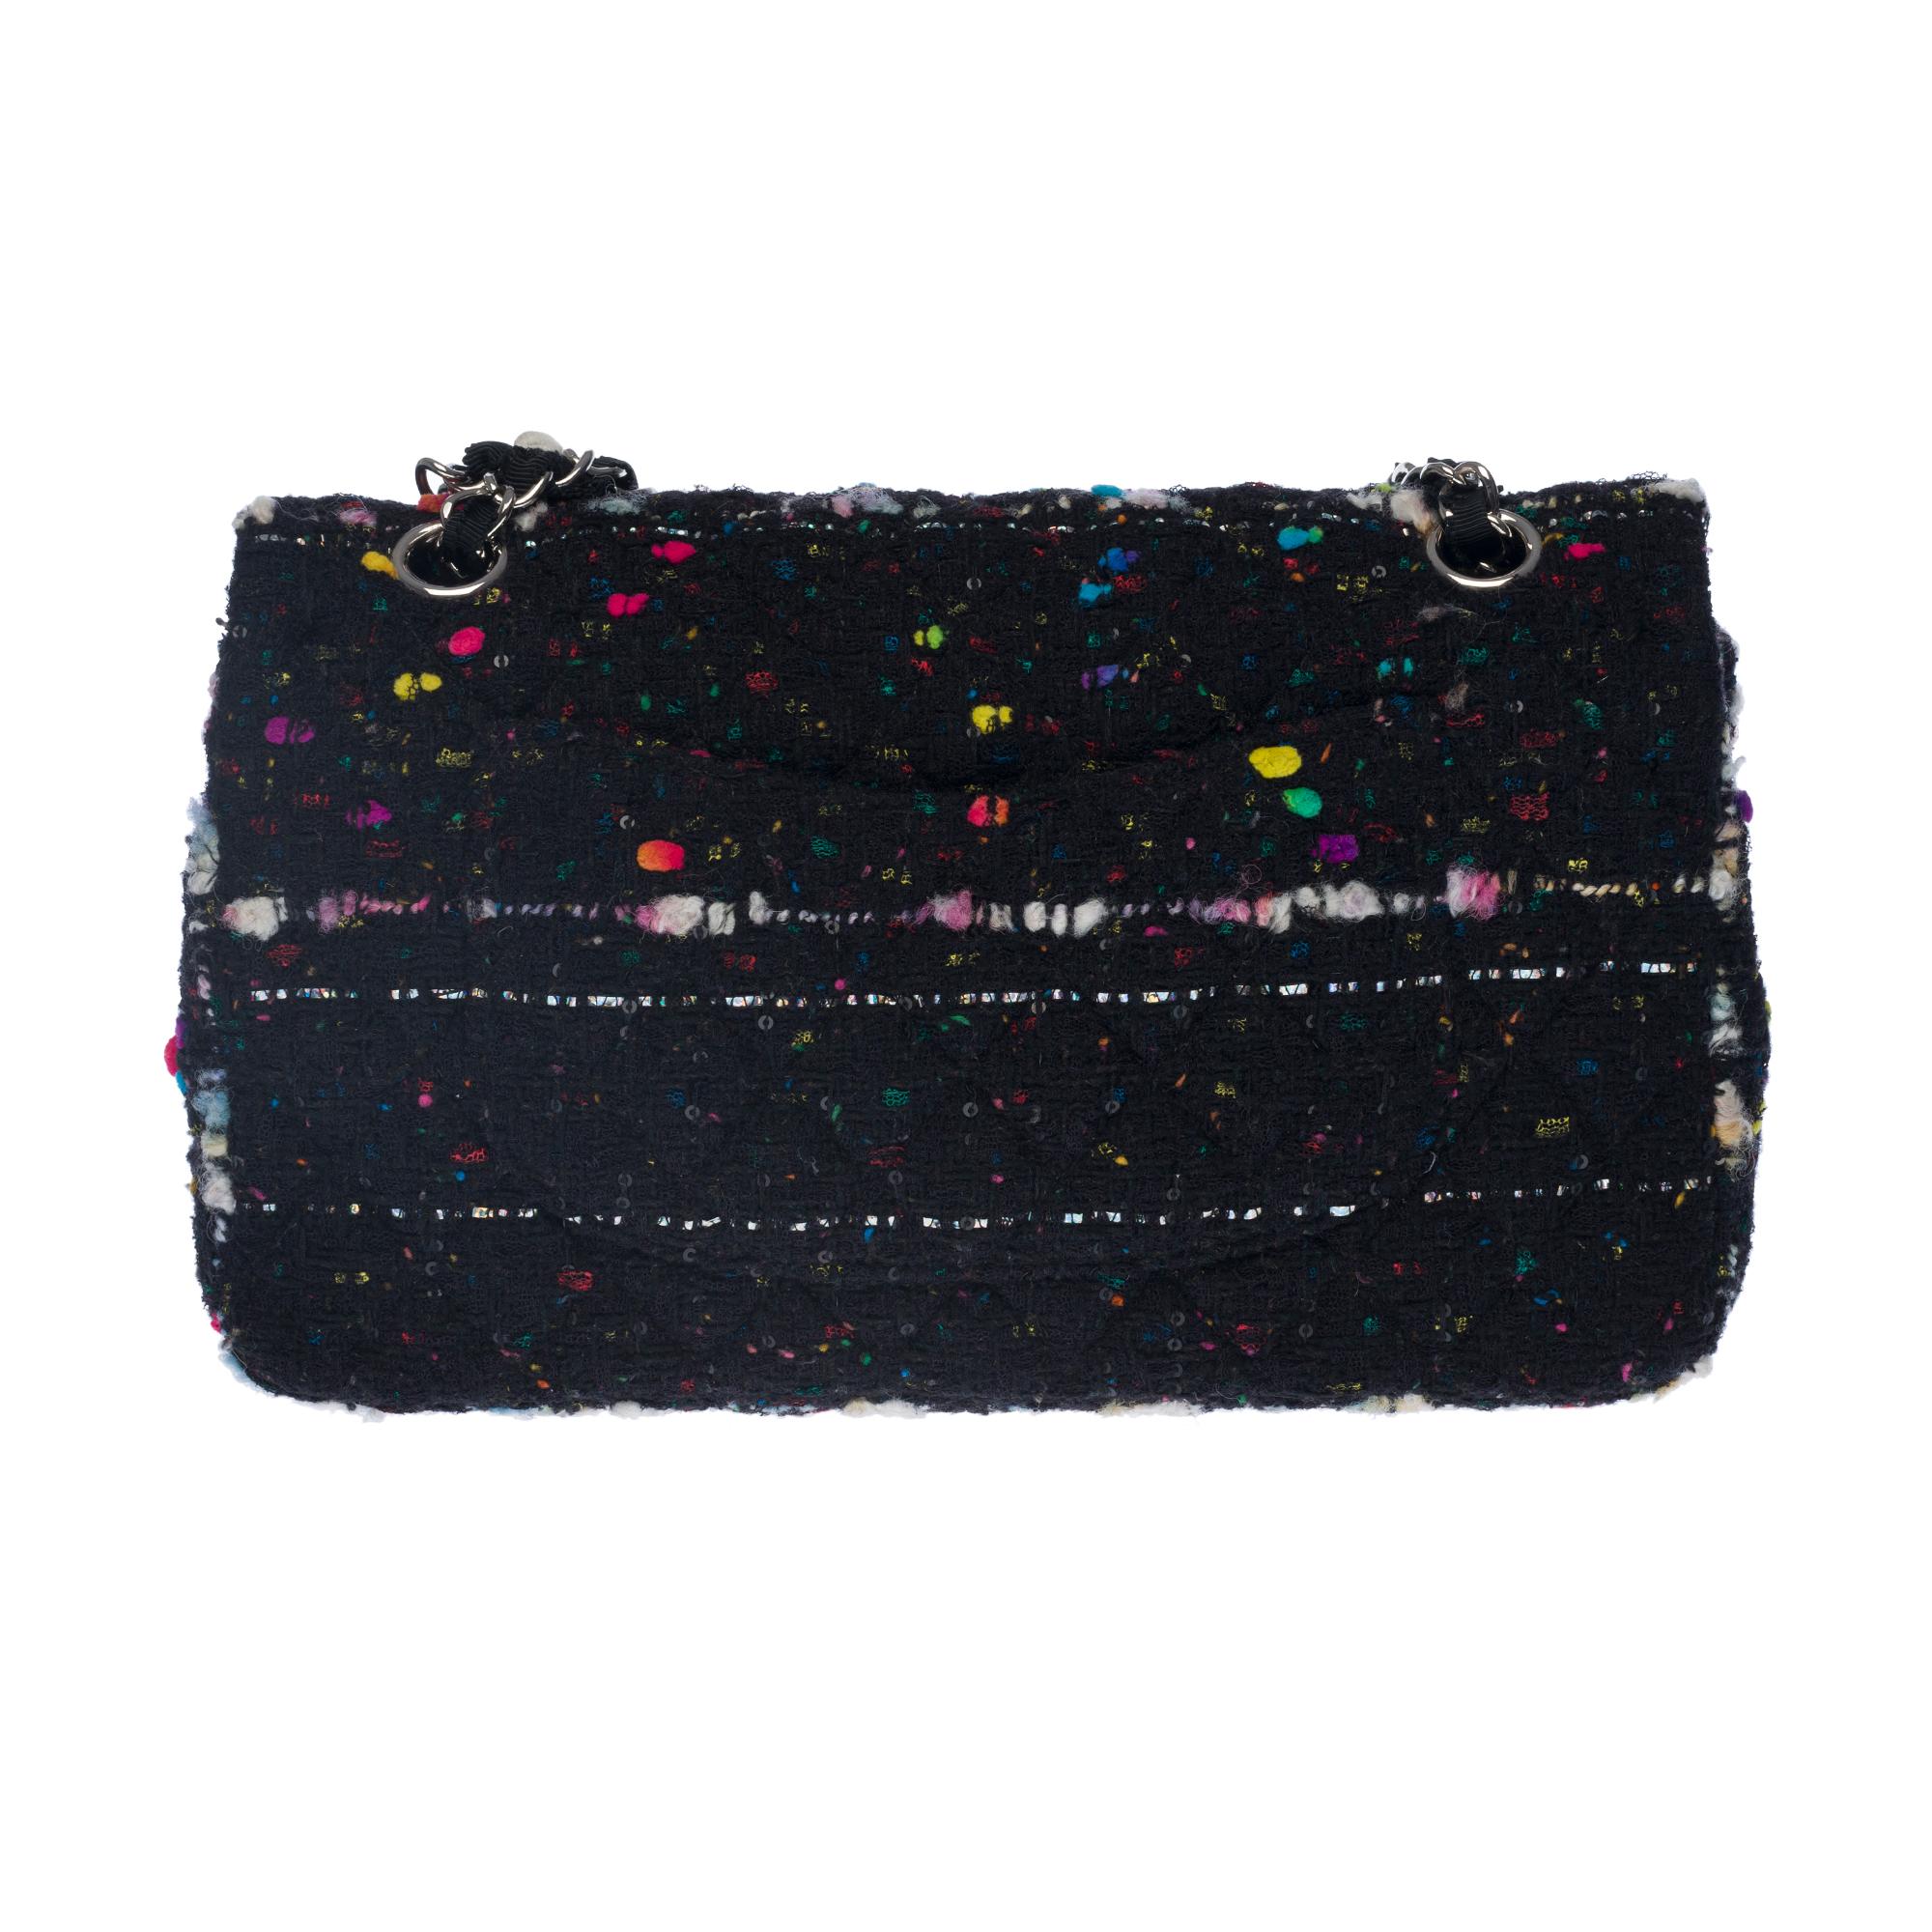 Black Limited Edition Chanel Timeless Shoulder bag in Multicolor Tweed with SHW